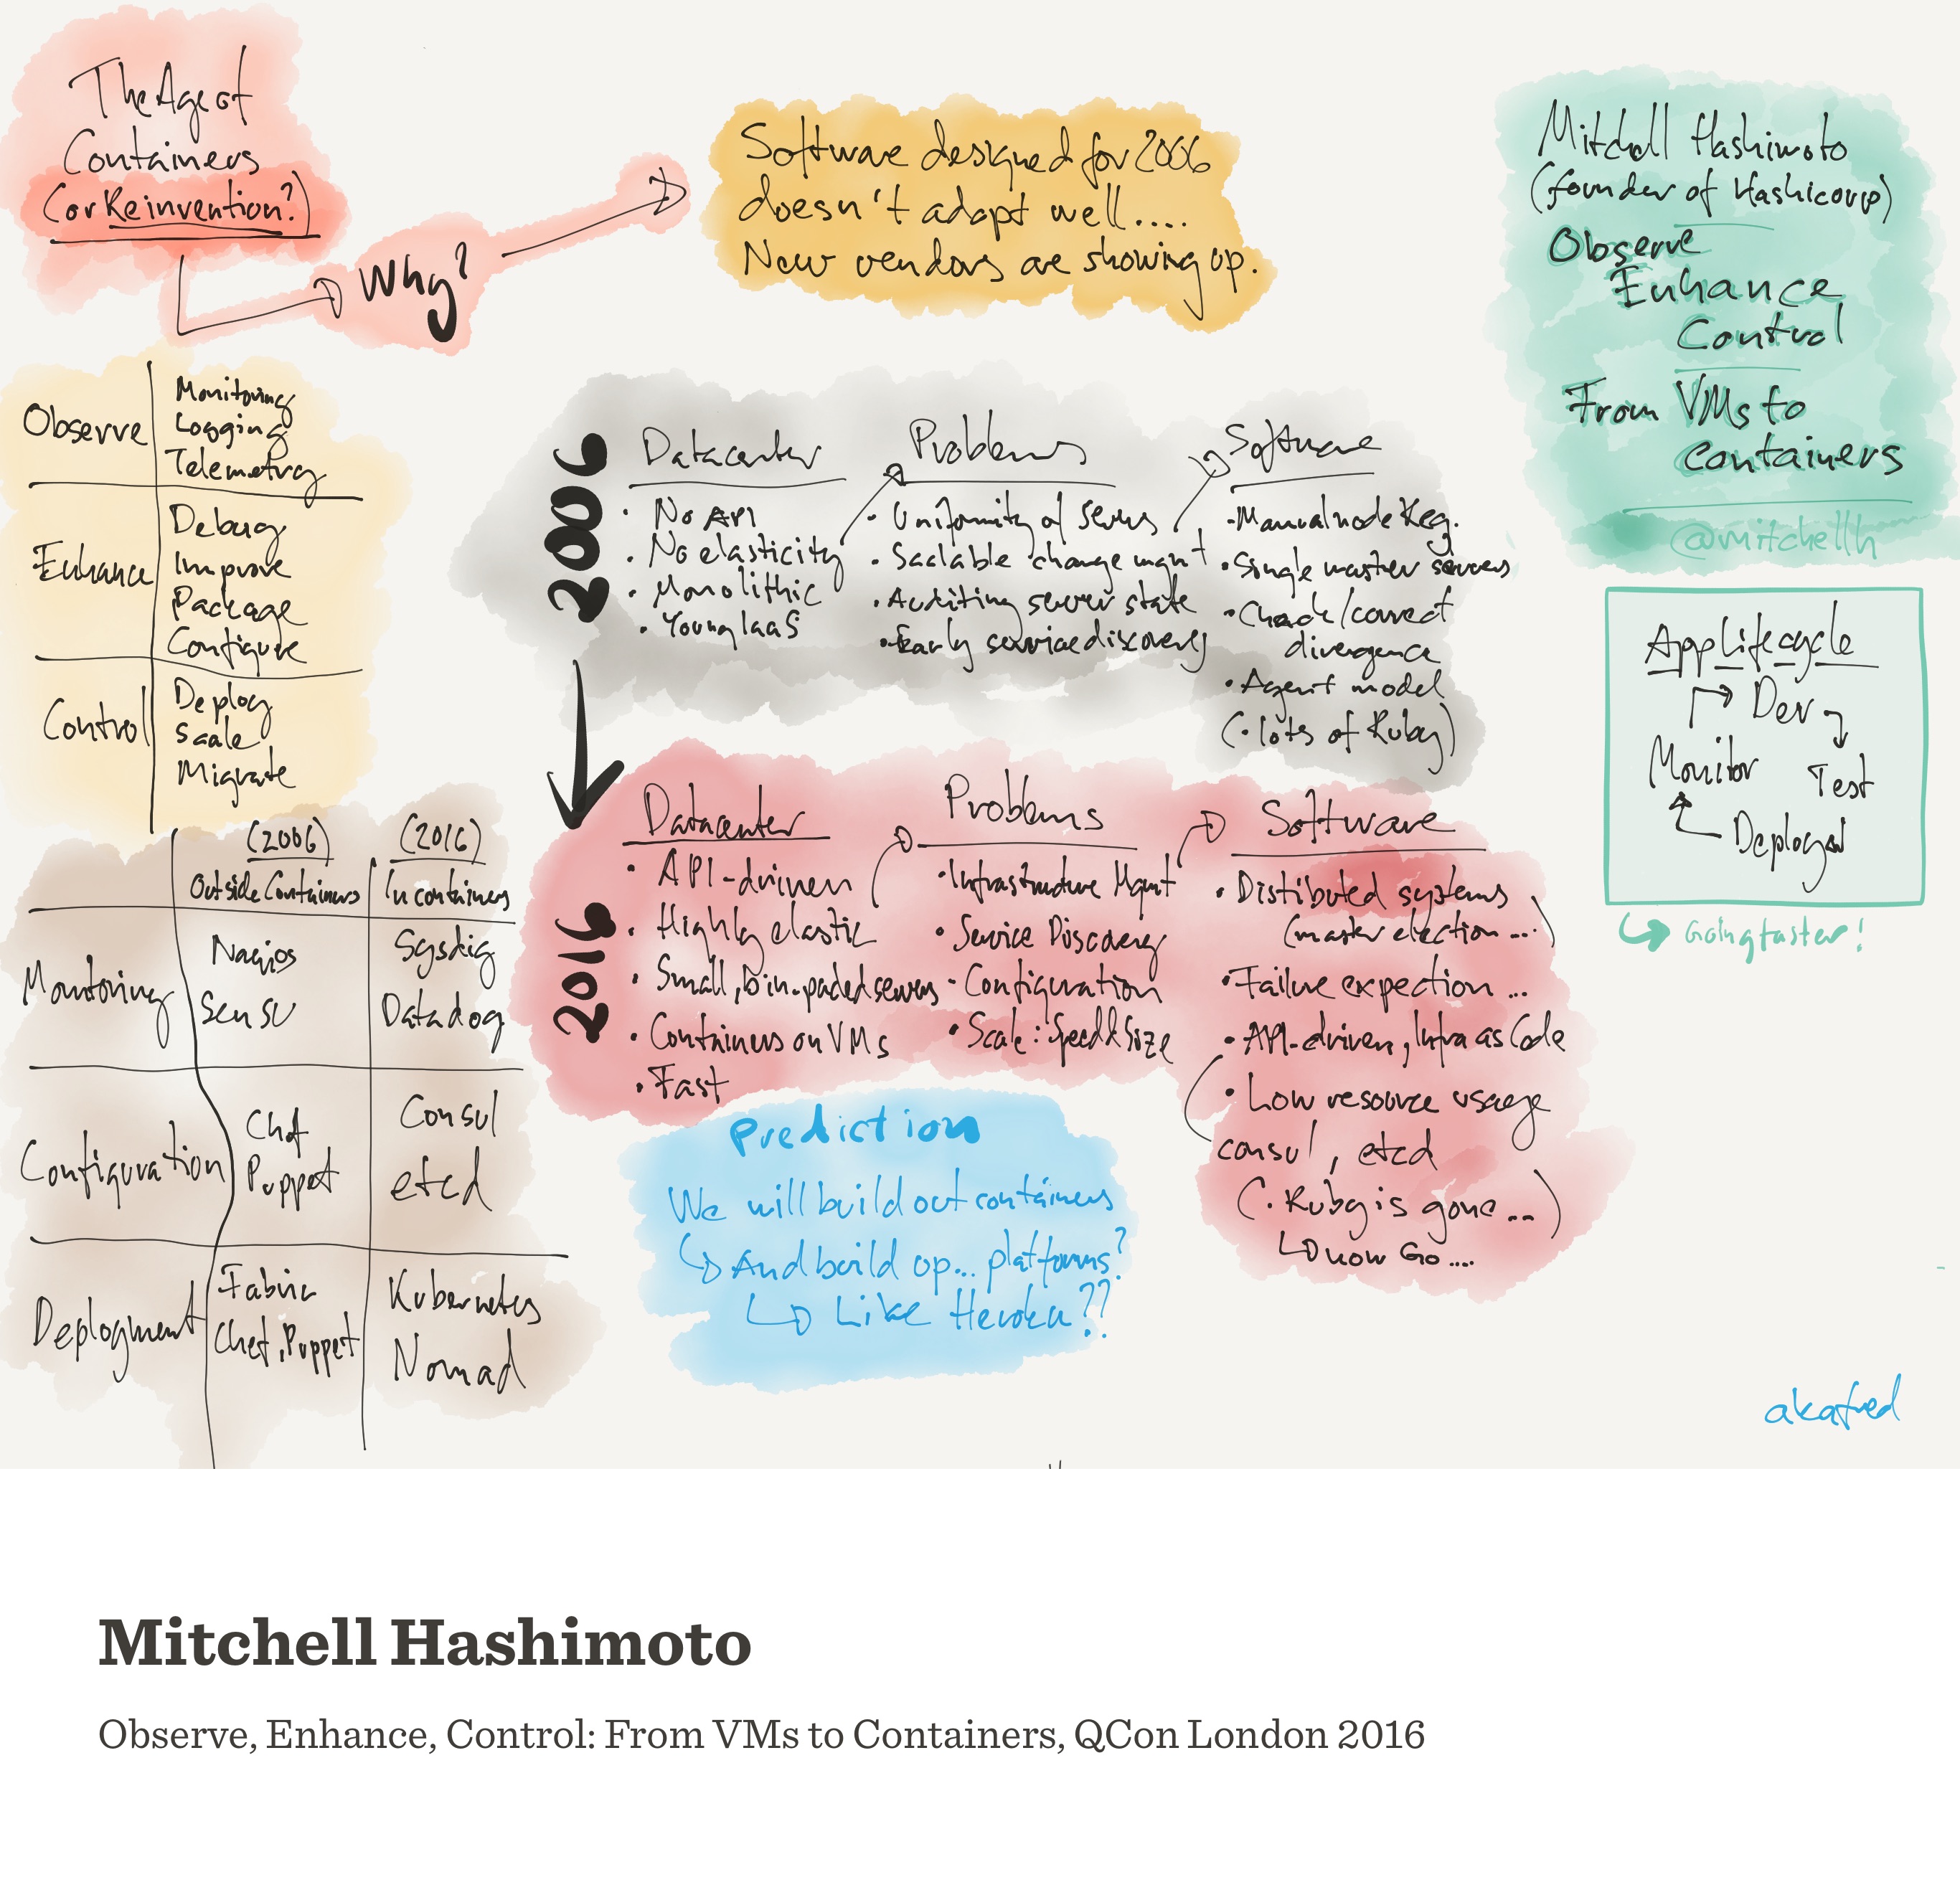 Notes from Observe, Enhance, Control: From VMs to Containers (Mitchell Hashimoto)